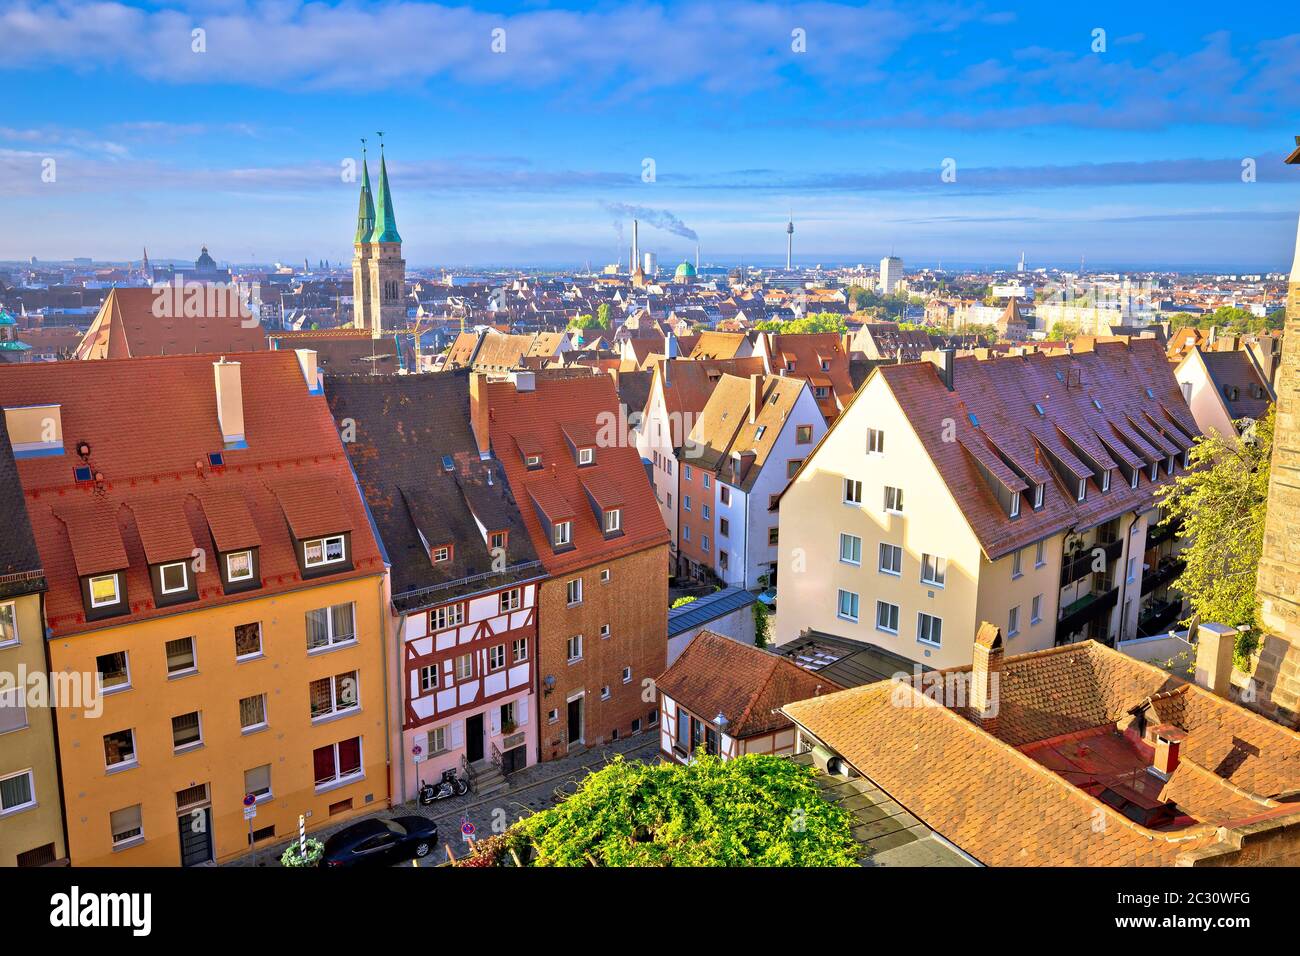 Nurnberg. Rooftops and cityscape of Nuremberg old town view Stock Photo